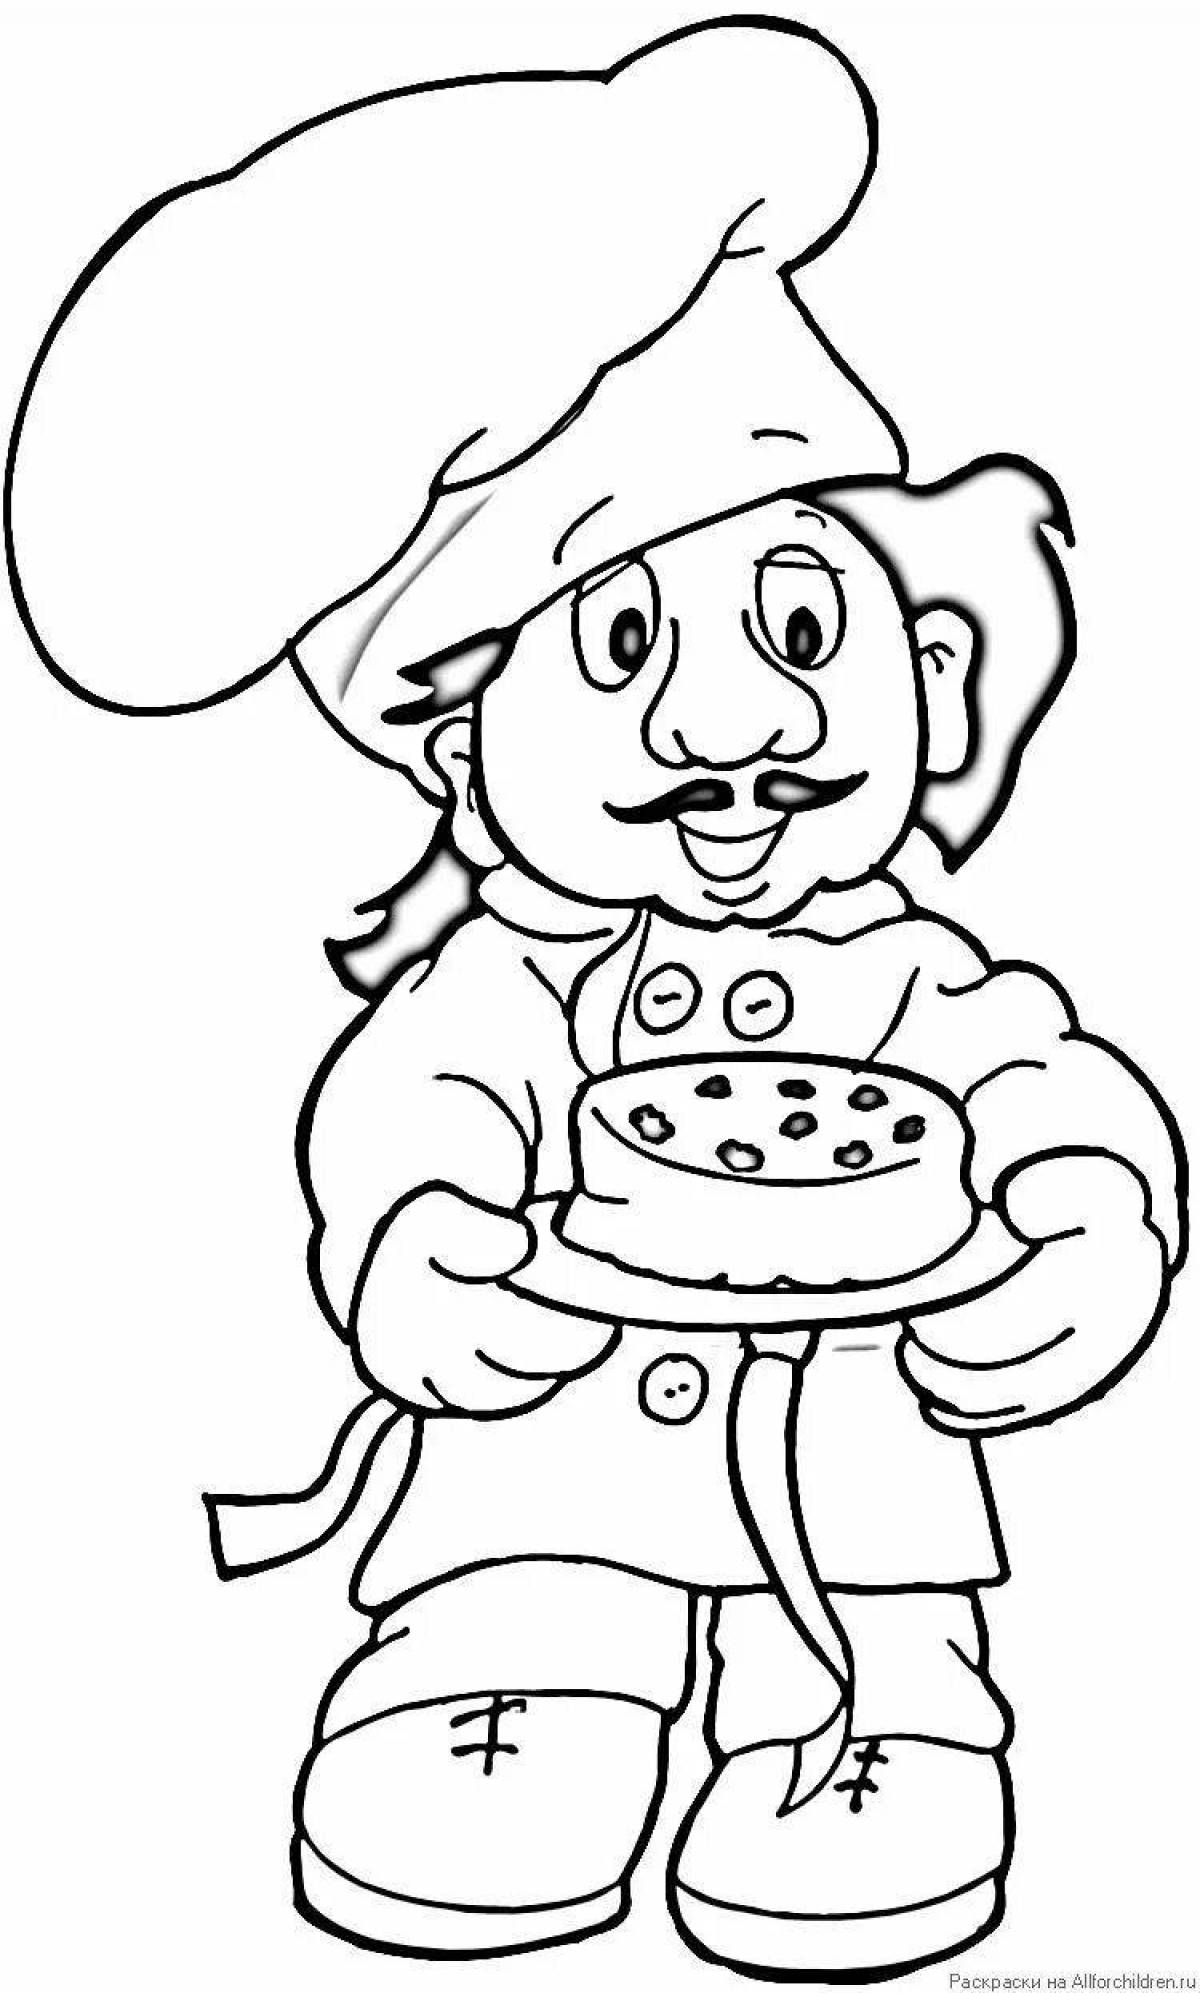 Coloring book is a funny profession of a cook